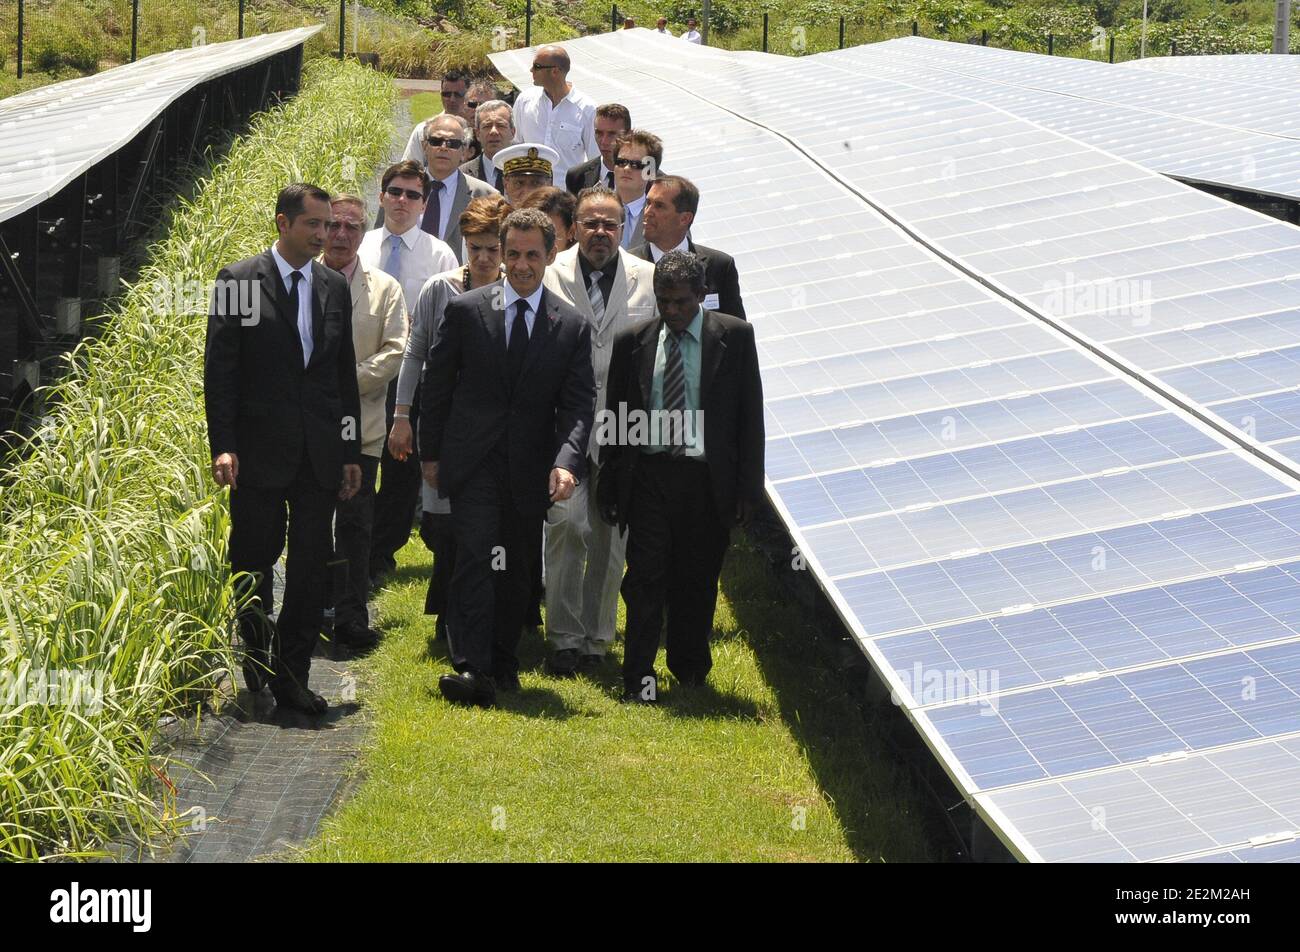 French President Nicolas Sarkozy (C), alongside President of French energy giant EDF (Electricite de France) Henri Proglio, French carmaker Renault's COO Patrick Pelata, French Junior Minister for Ecology Chantal Jouanno and French overseas territories and Departments Minister Marie-Luce Penchard, tours the AKUO photovoltaic site in Saint-Pierre, French overseas department La Reunion, on January 19, 2010, during his official two-day trip to the Indian Ocean. Photo by Elodie Gregoire/ABACAPRESS.COM Stock Photo